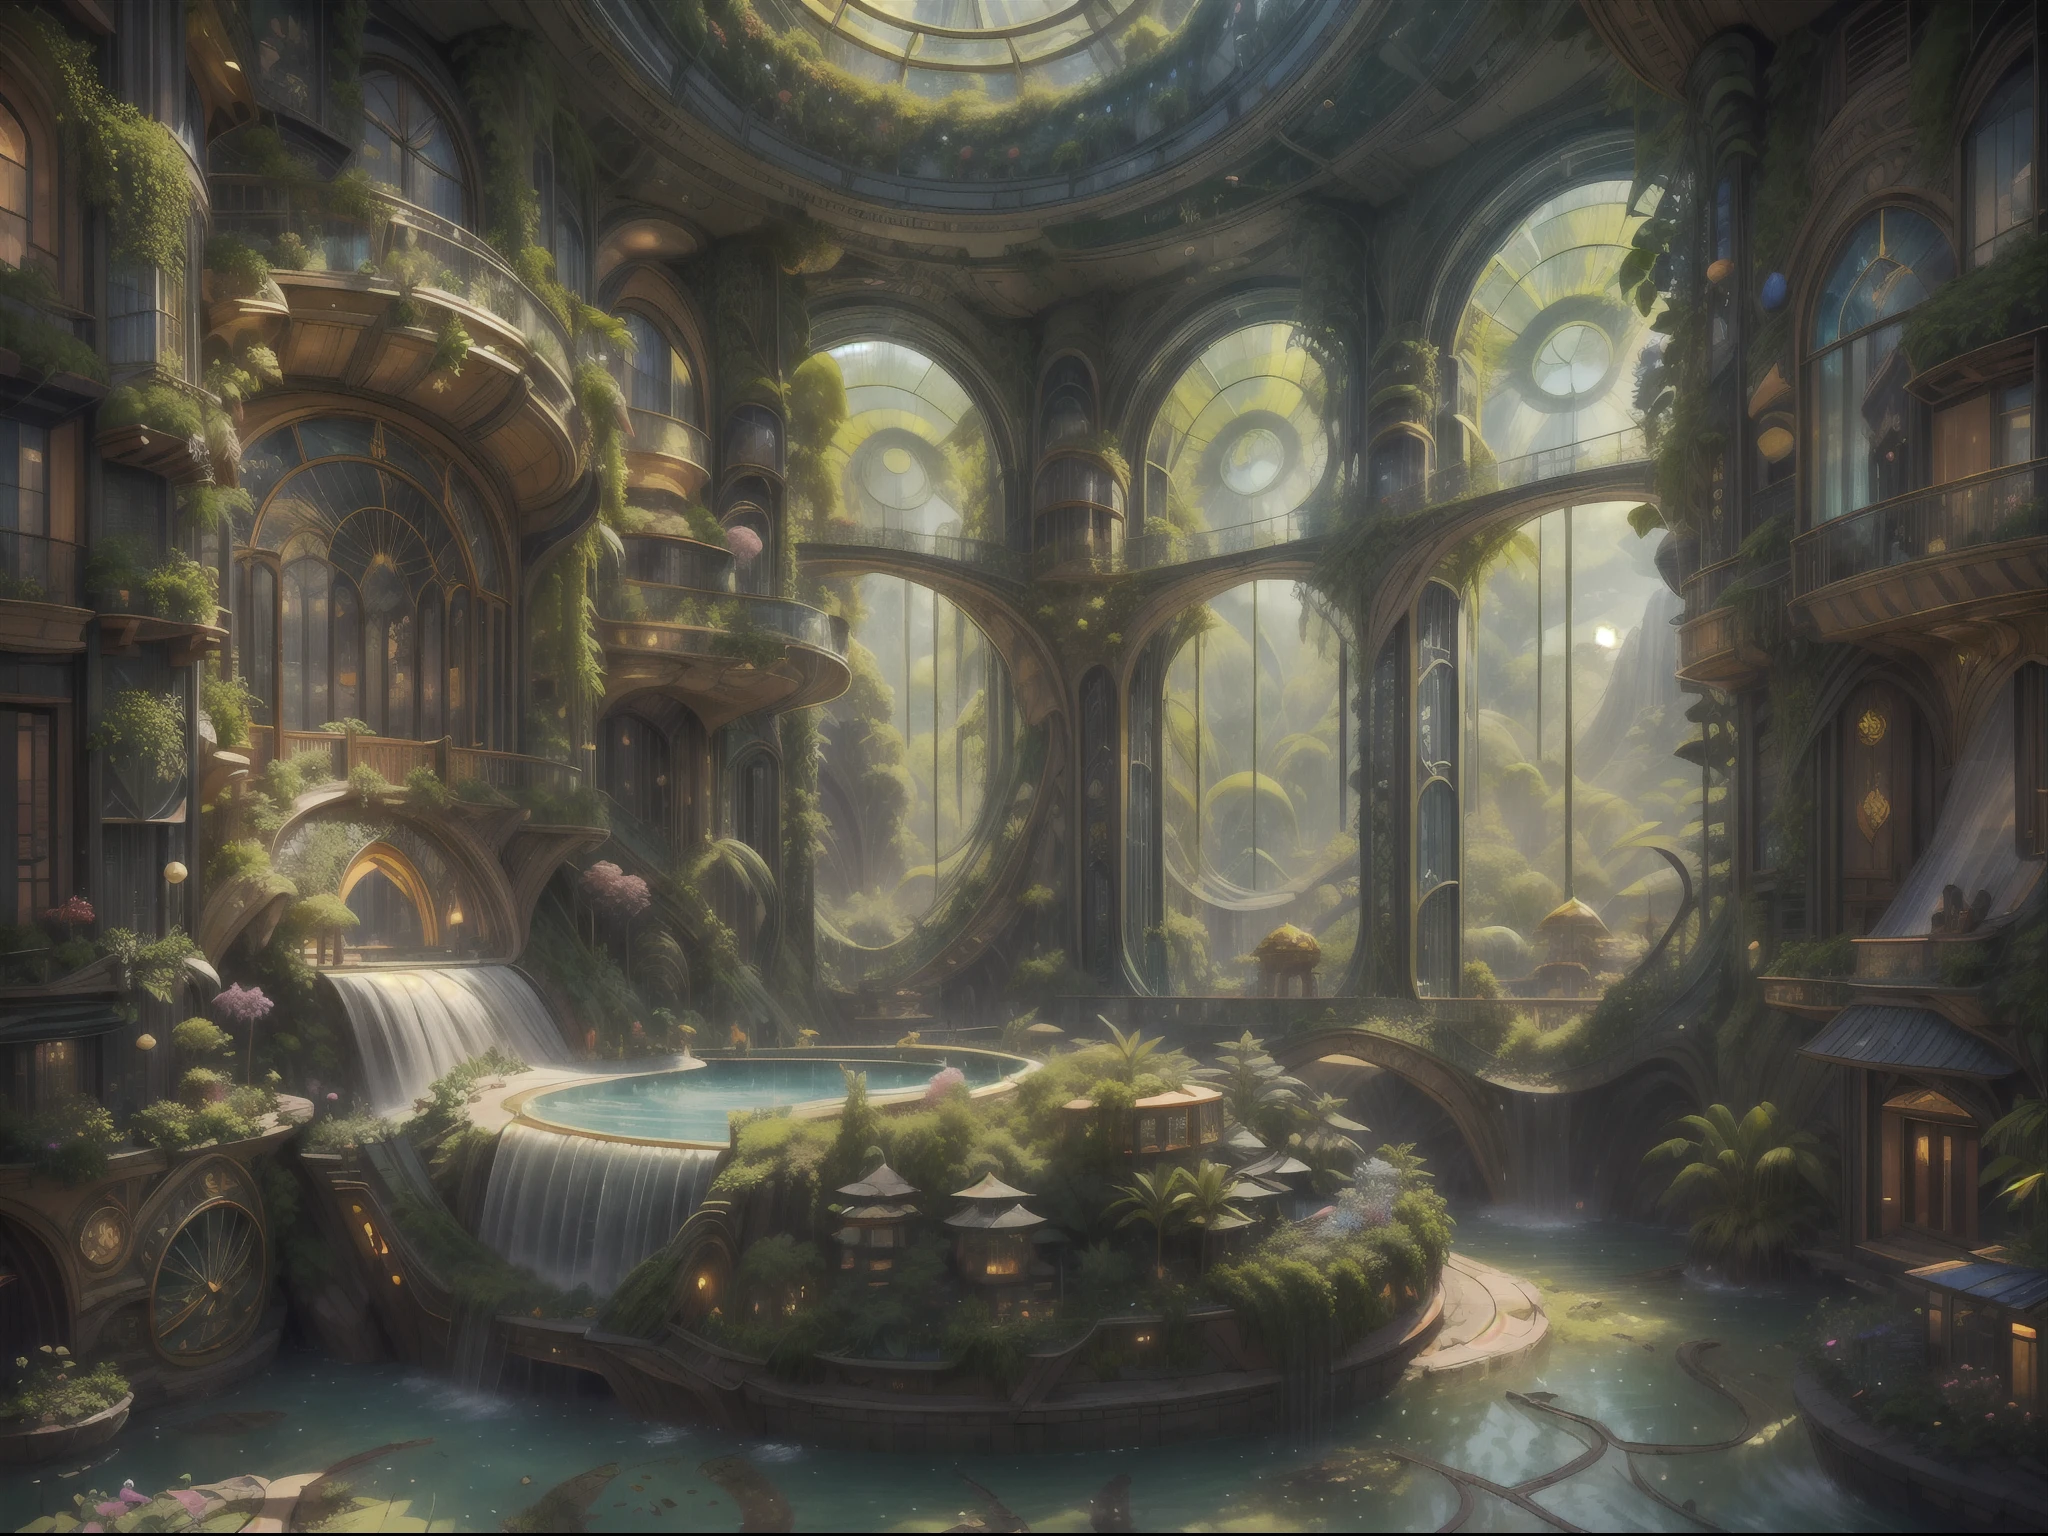 Title: "Solarpunk Dreamscape: The Royal Botanical Sanctuary | This ornate botanical bedroom, inspired by the opulence of Versailles, invites viewers to immerse themselves in a world of wonders. (((Generate an ornate solarpunk and botanical elegant bedroom in the style of Versailles with a grand historical window.))) The grand historical window, adorned with intricate carvings, dominates one wall. Through the colossal window, a bustling solarpunk dreamscape cityscape unfolds. The cityscape is a marvel of breathtaking complexity - a futuristic metropolis that glimmers with countless colors and buildings of various sizes, an awe-inspiring testament to human creativity and architectural prowess. The solarpunk dreamscape cityscape is a symphony of vibrant colors, reminiscent of a utopian paradise. The buildings stretch into the sky, each one featuring imaginative solarpunk details - rooftop gardens adorned with lush greenery, cascading waterfalls powered by sustainable energy, and whimsical elements that spark the imagination. This high-resolution, 3D-rendered cityscape is a masterpiece of digital art, seamlessly blending the worlds of fantasy and sci-fi. In this fantastical dreamscape, beauty is found in the subtlest of details. Delicate tendrils of ivy climb gracefully up the walls, while gentle petals from floating flowers dance through the air. Exquisite tapestries and paintings of mythical creatures adorn the walls, each telling its own enchanting story.